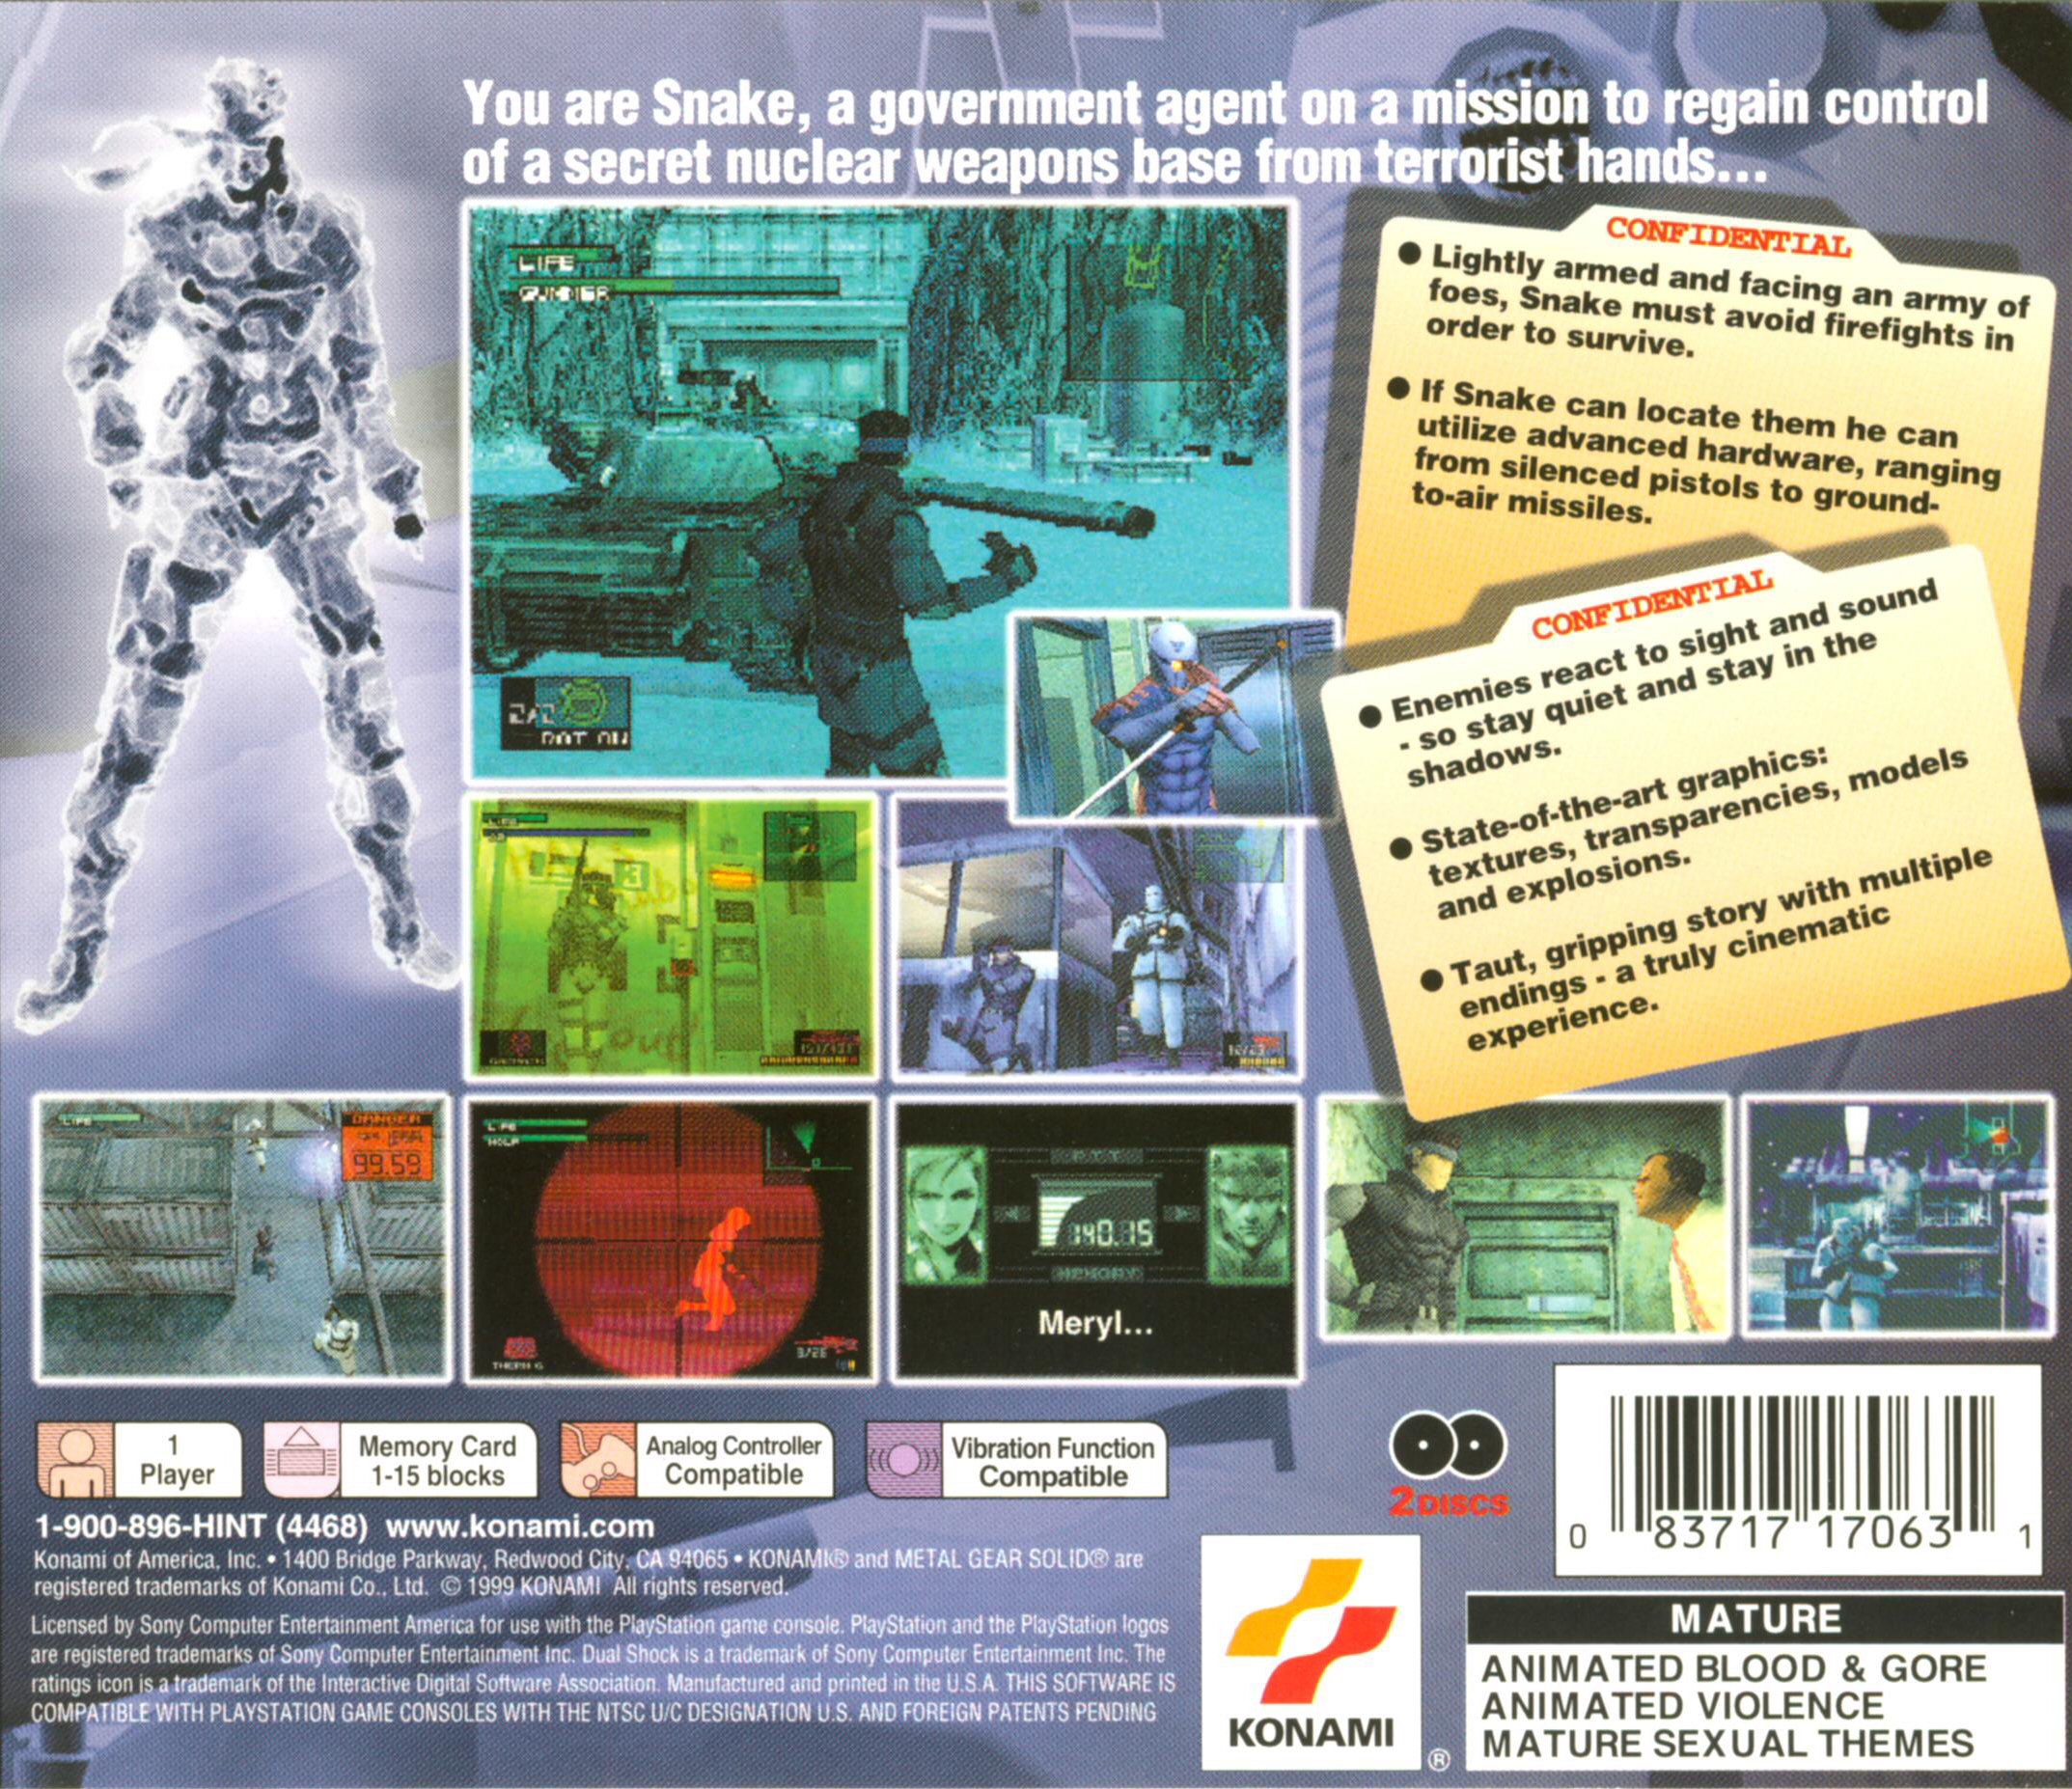 metal-gear-solid-psx-cover